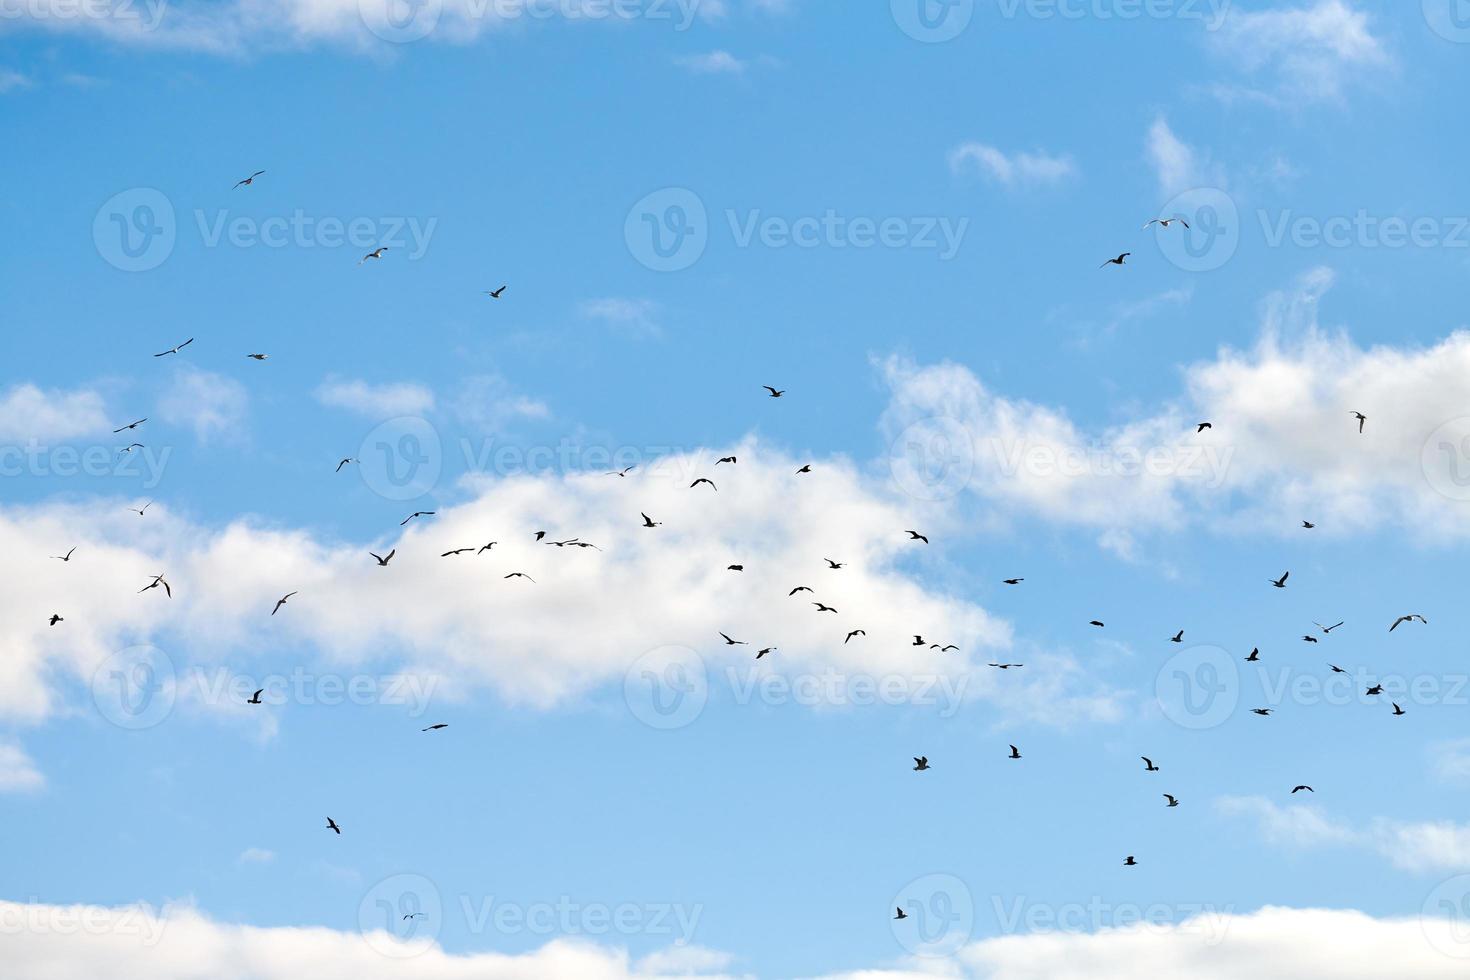 Birds seagulls flying in blue sky with white fluffy clouds photo